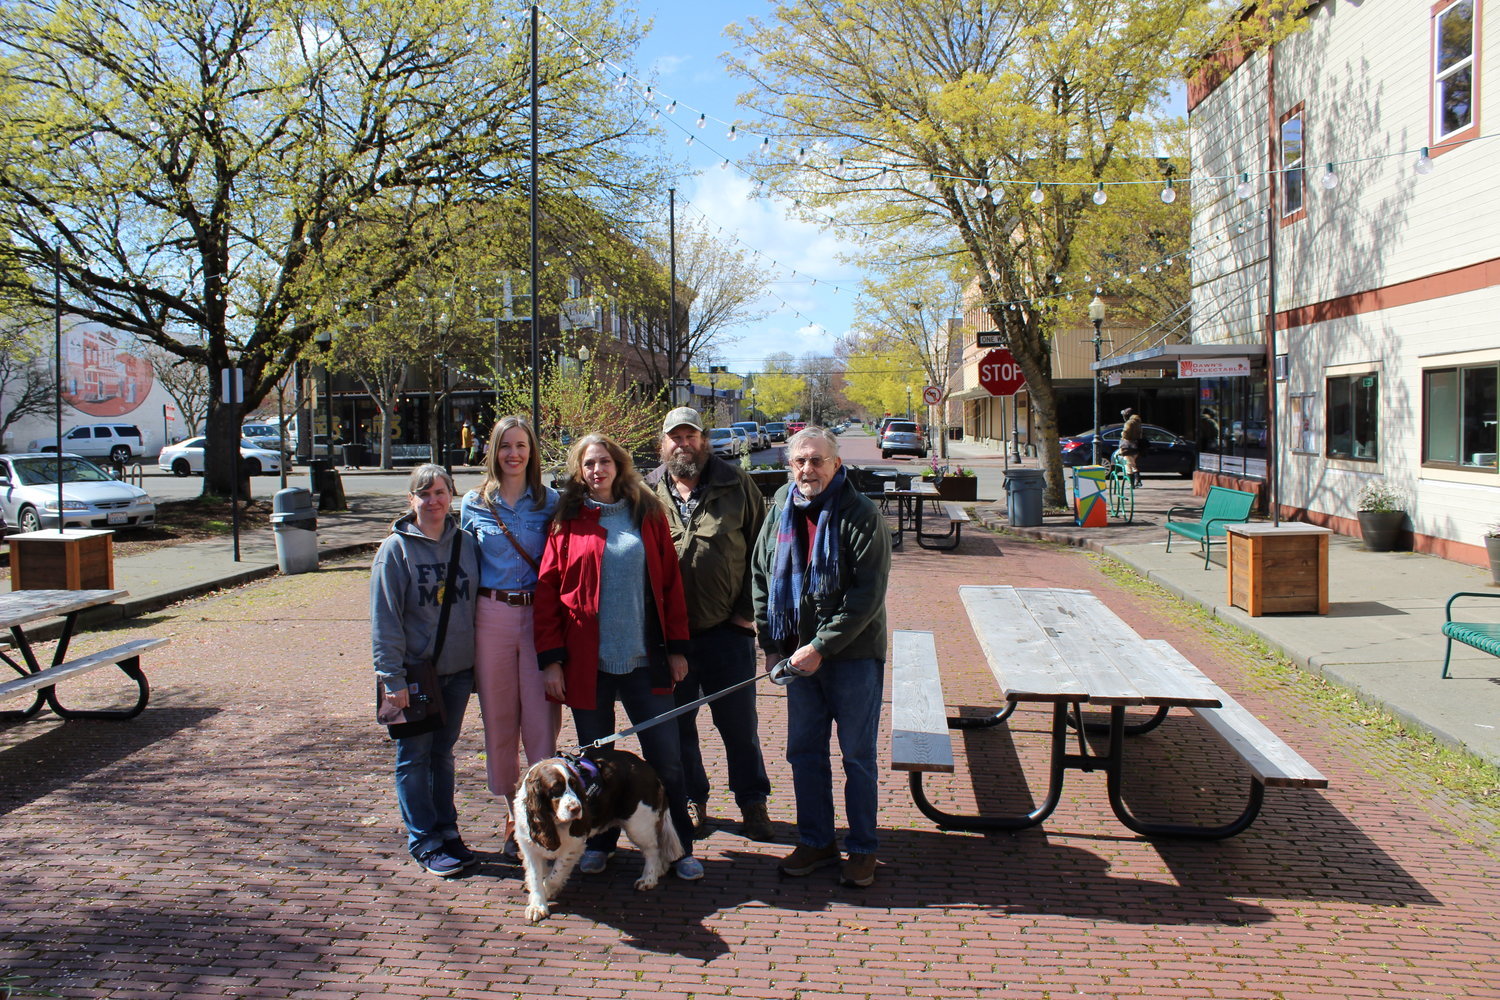 Centralia Farmers Market supporters Wanda Steger, Sarah Althauser, Marie Shankle, Brett Shankle, Bruce Yost and market mascot Beatrice gather in Pine Street Plaza on a recent afternoon. After four seasons at the Centralia Factory Outlet, the market will open its season May 6 back in the heart of the downtown core.